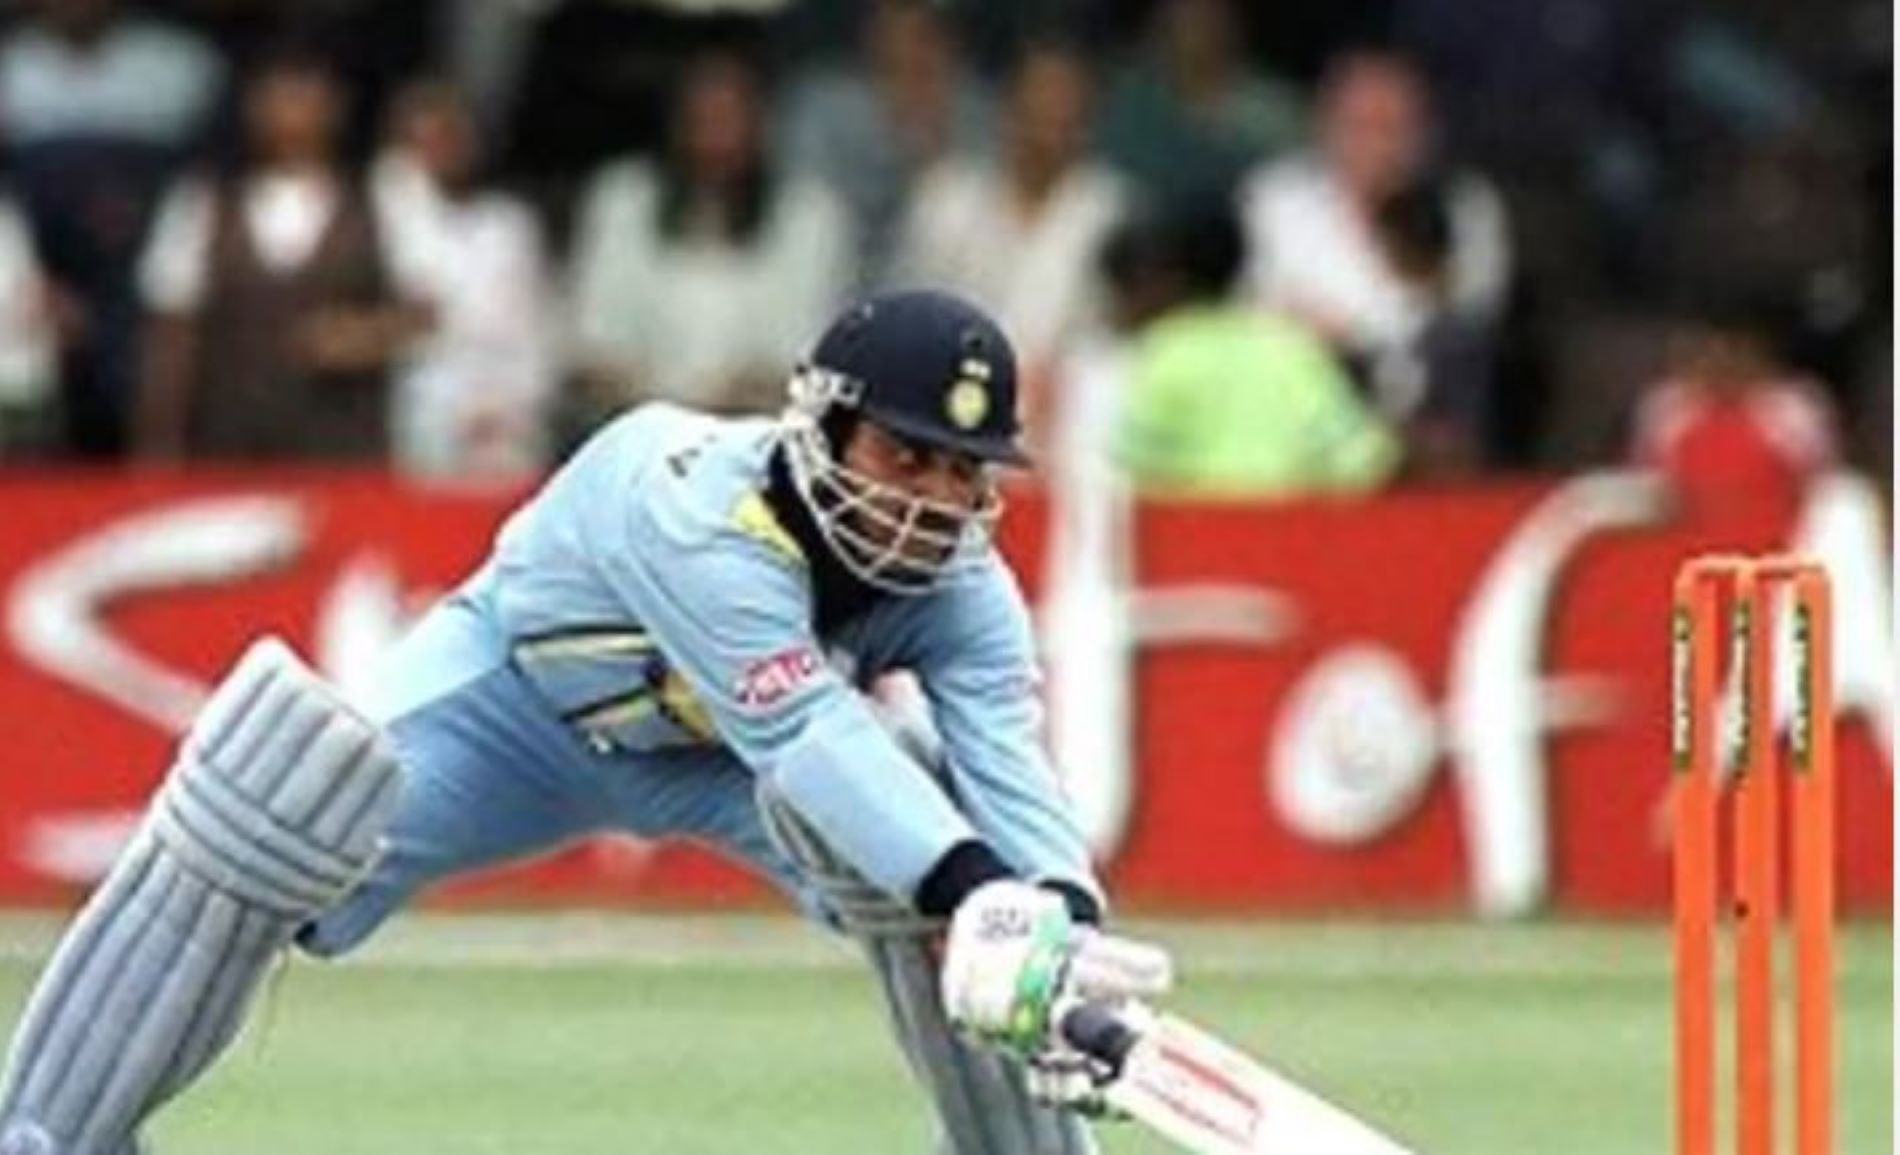 Sourav Ganguly played arguably his best ODI knock to lead India into the Champions Trophy final.